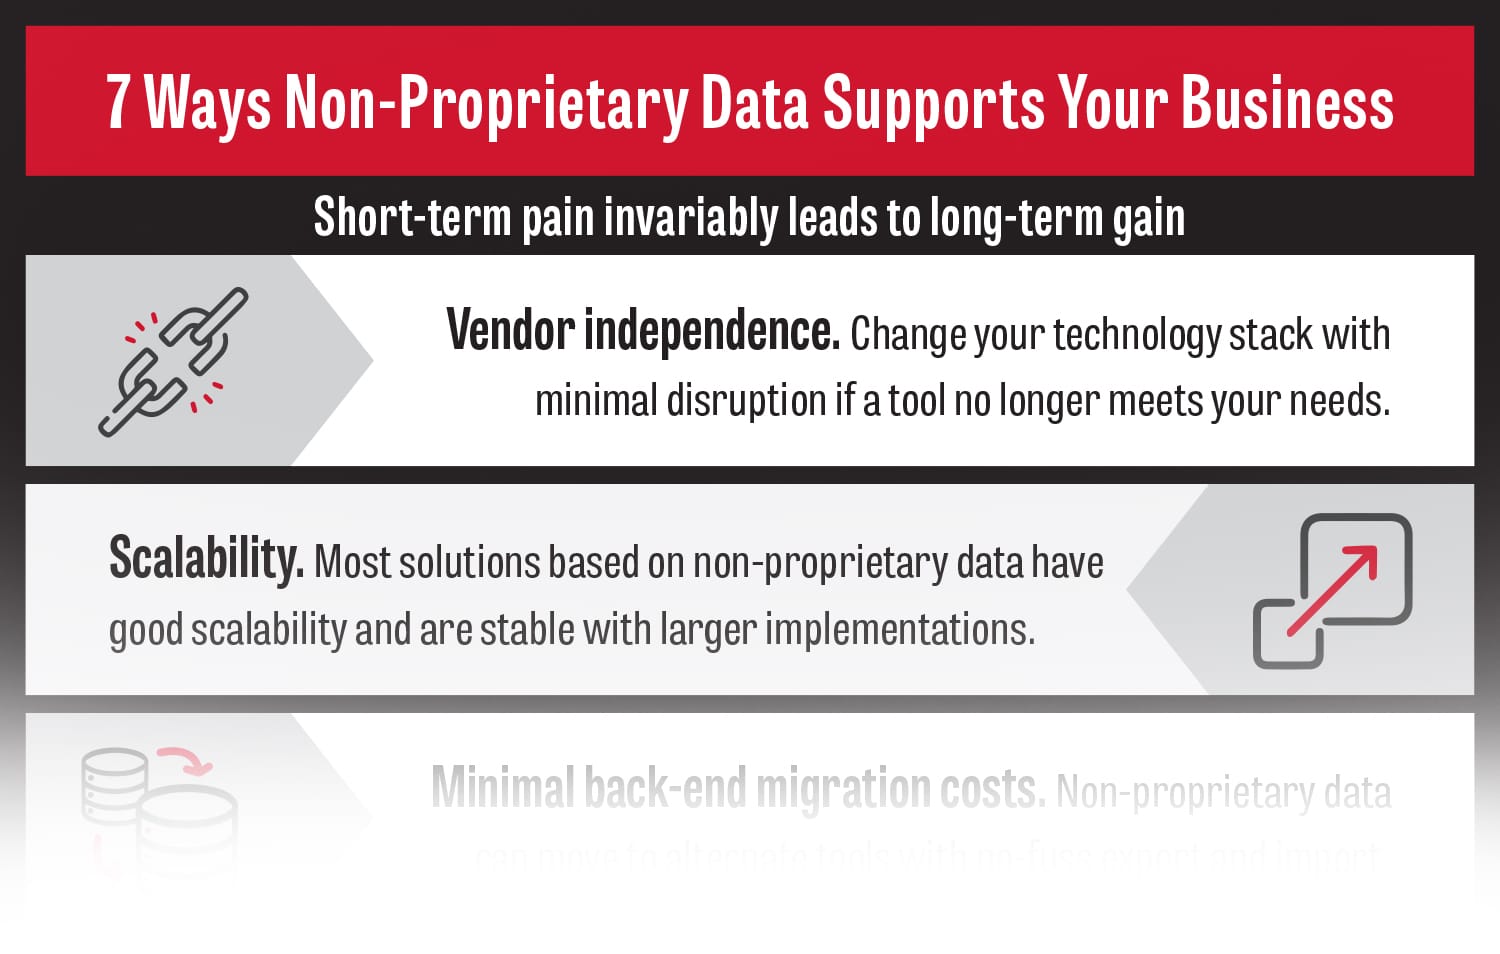 7 Ways Non-Proprietary Data Supports Your Business